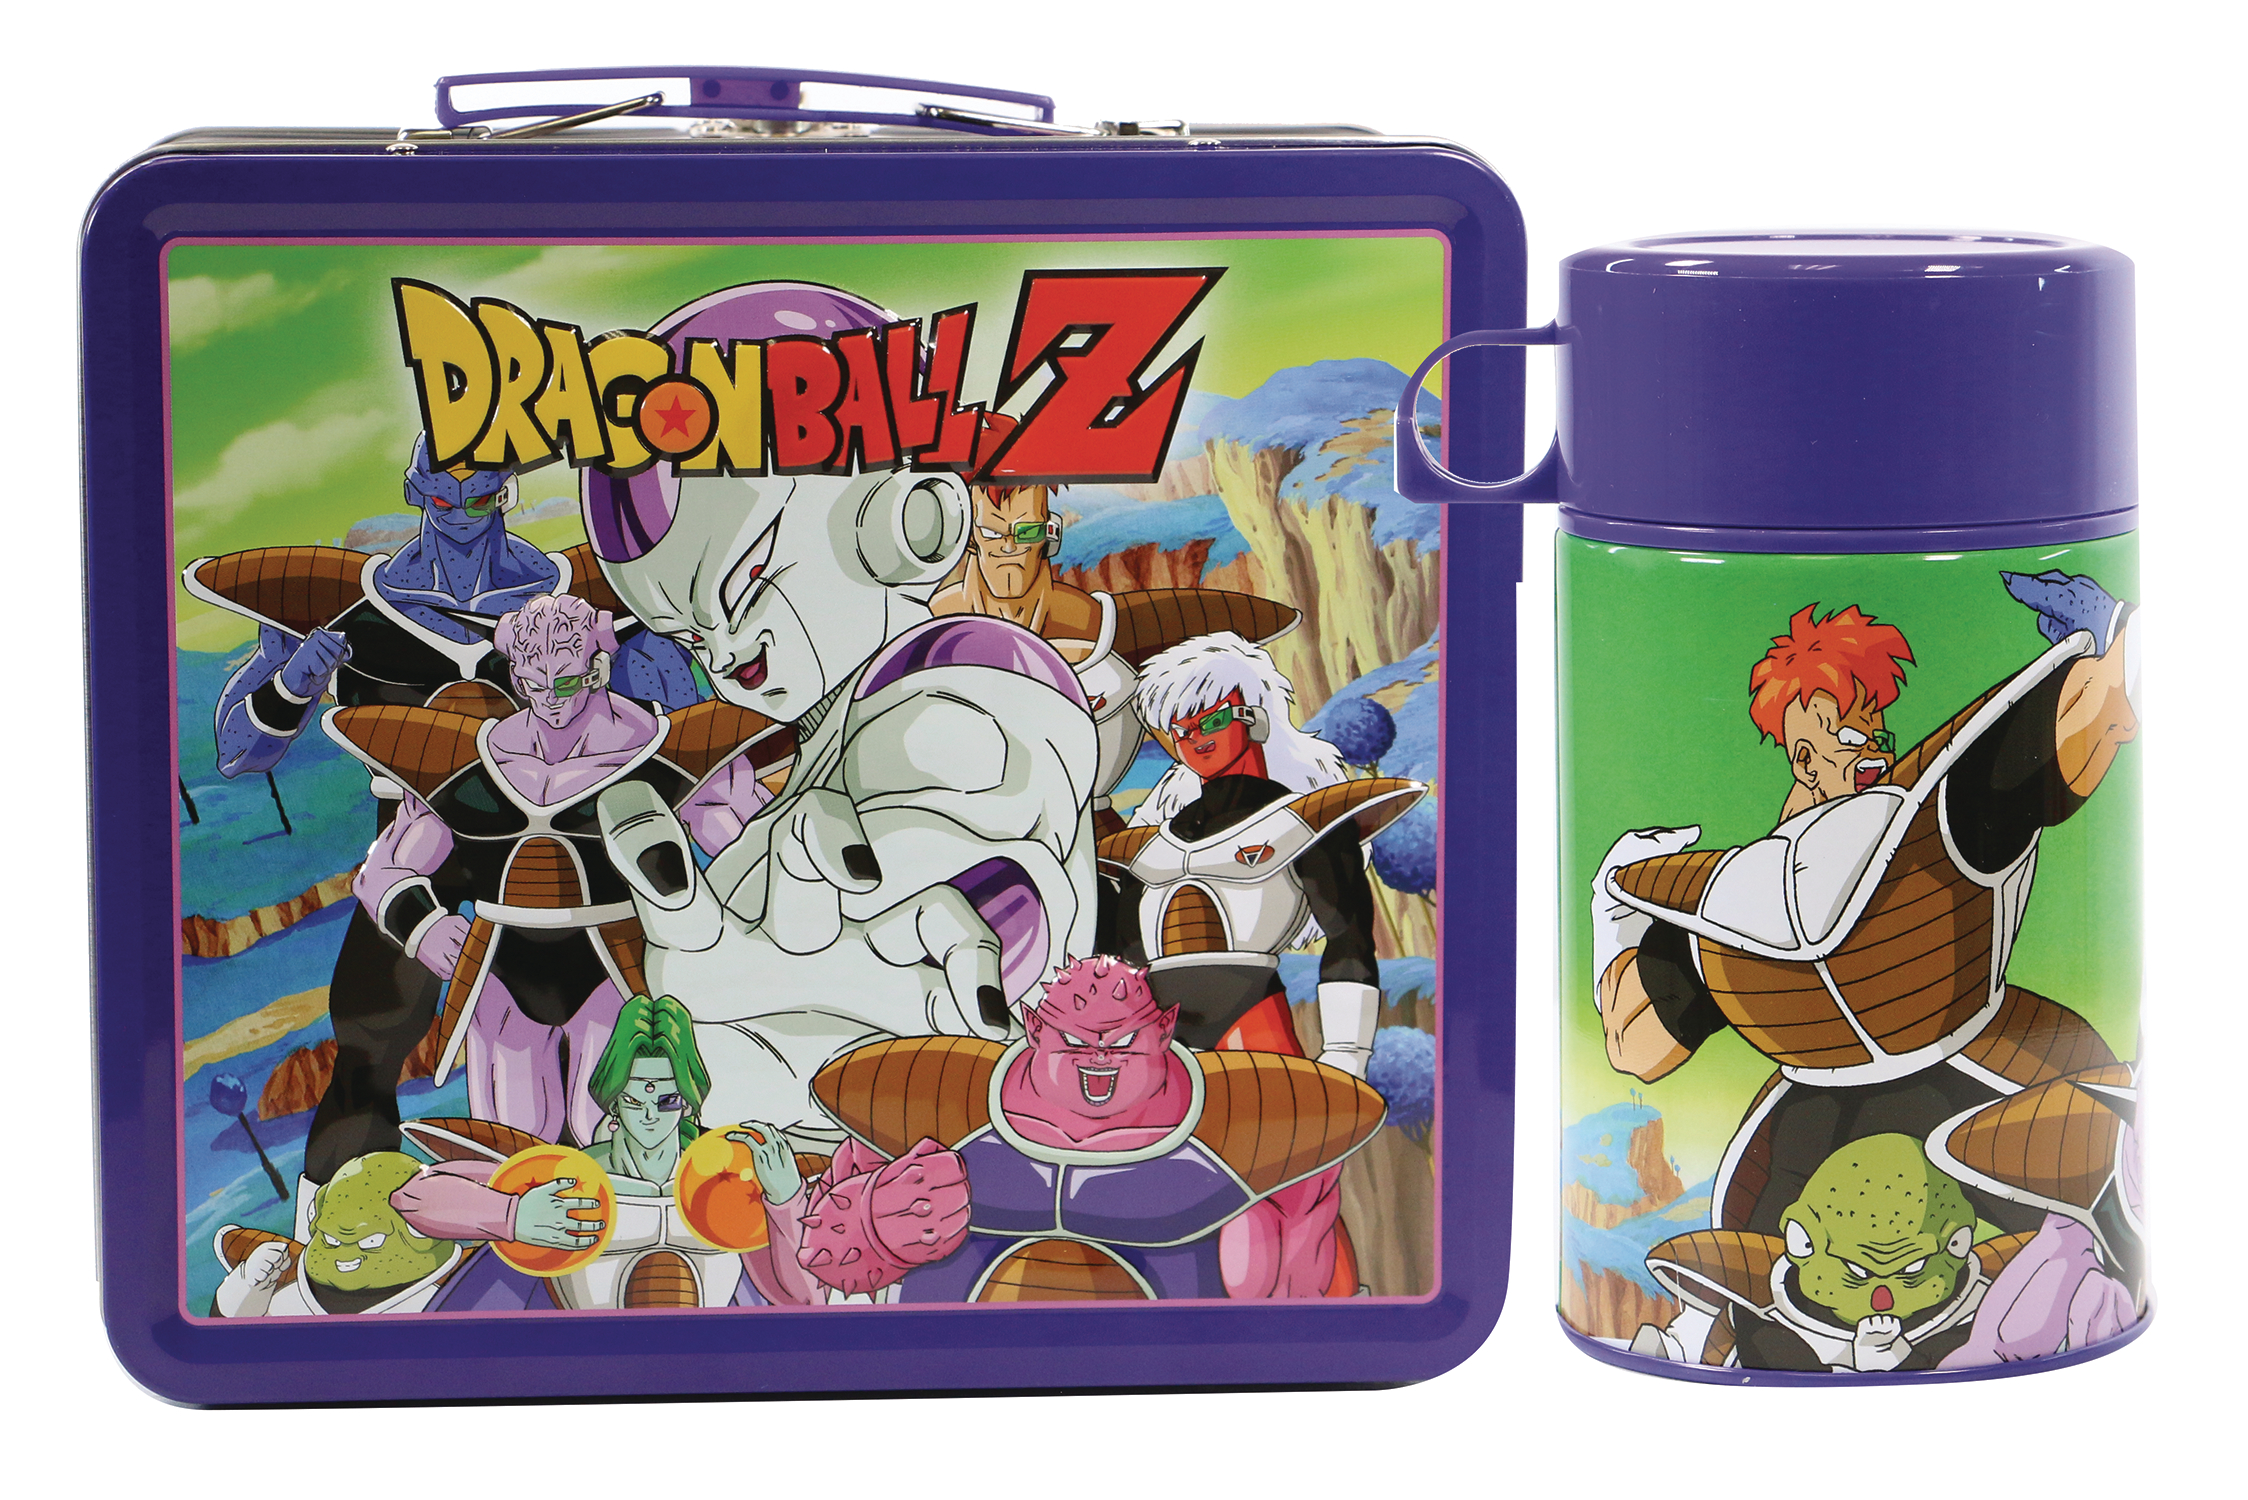 Tin Titans Dragon Ball Z Frieza Saga Px Lunch Box With Beverage Container